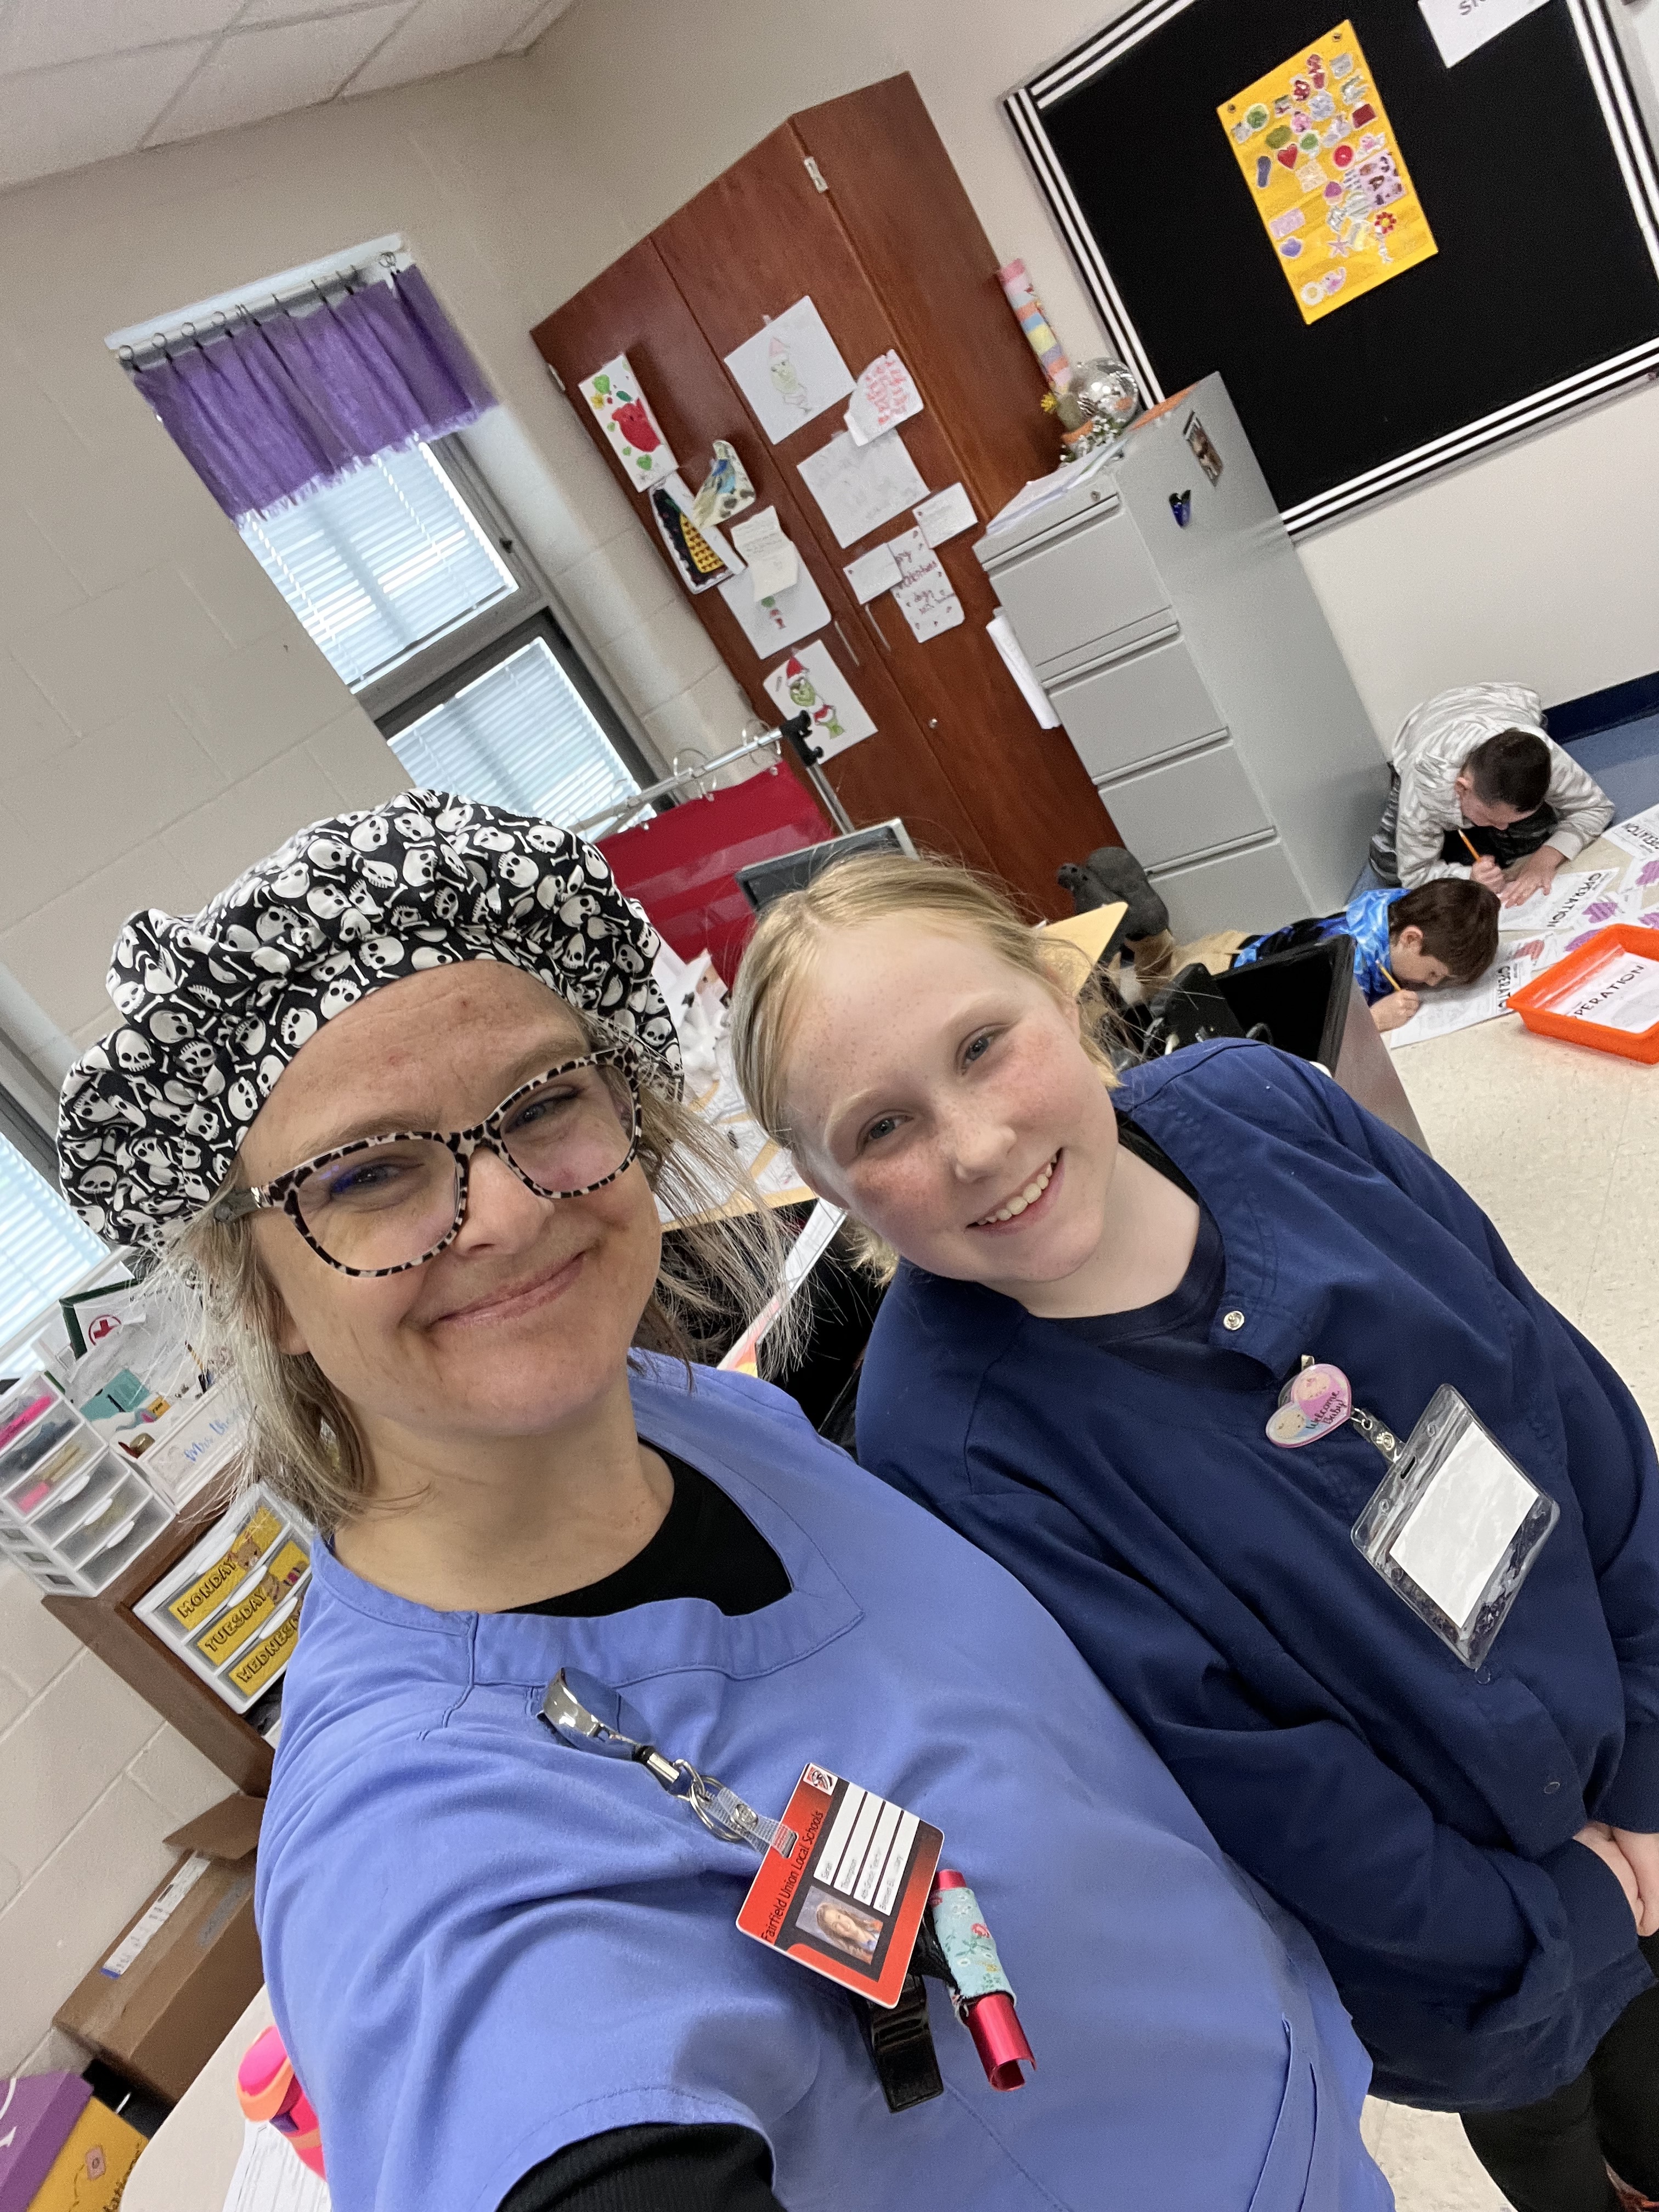 THe Nurse and one of her students.